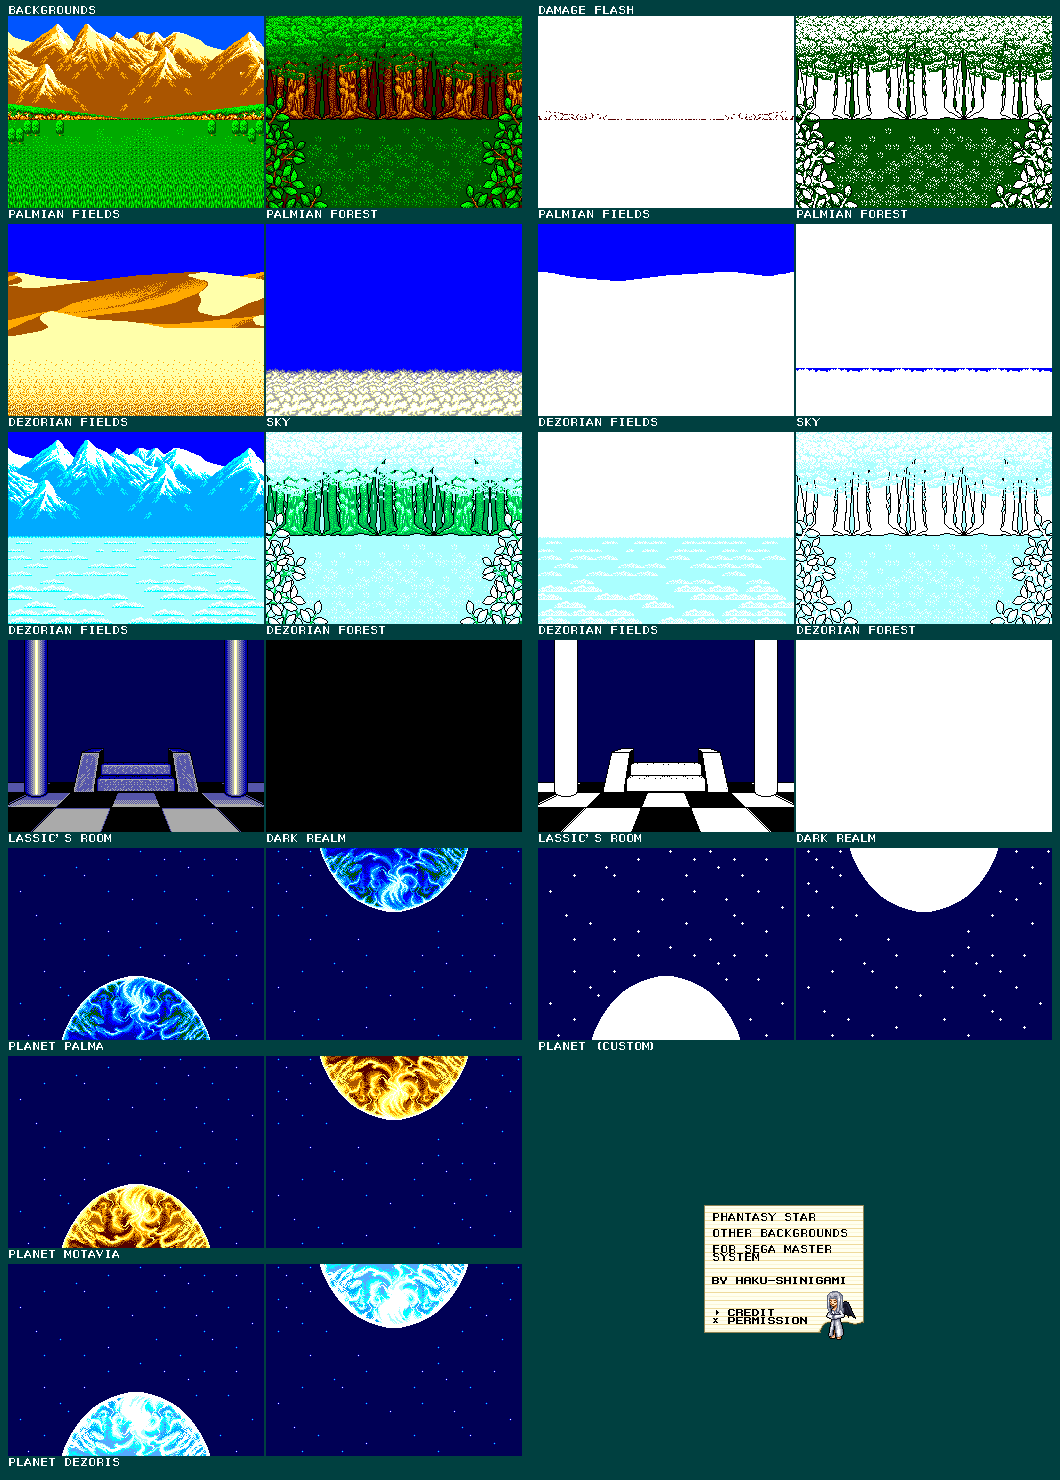 Phantasy Star - Other Backgrounds